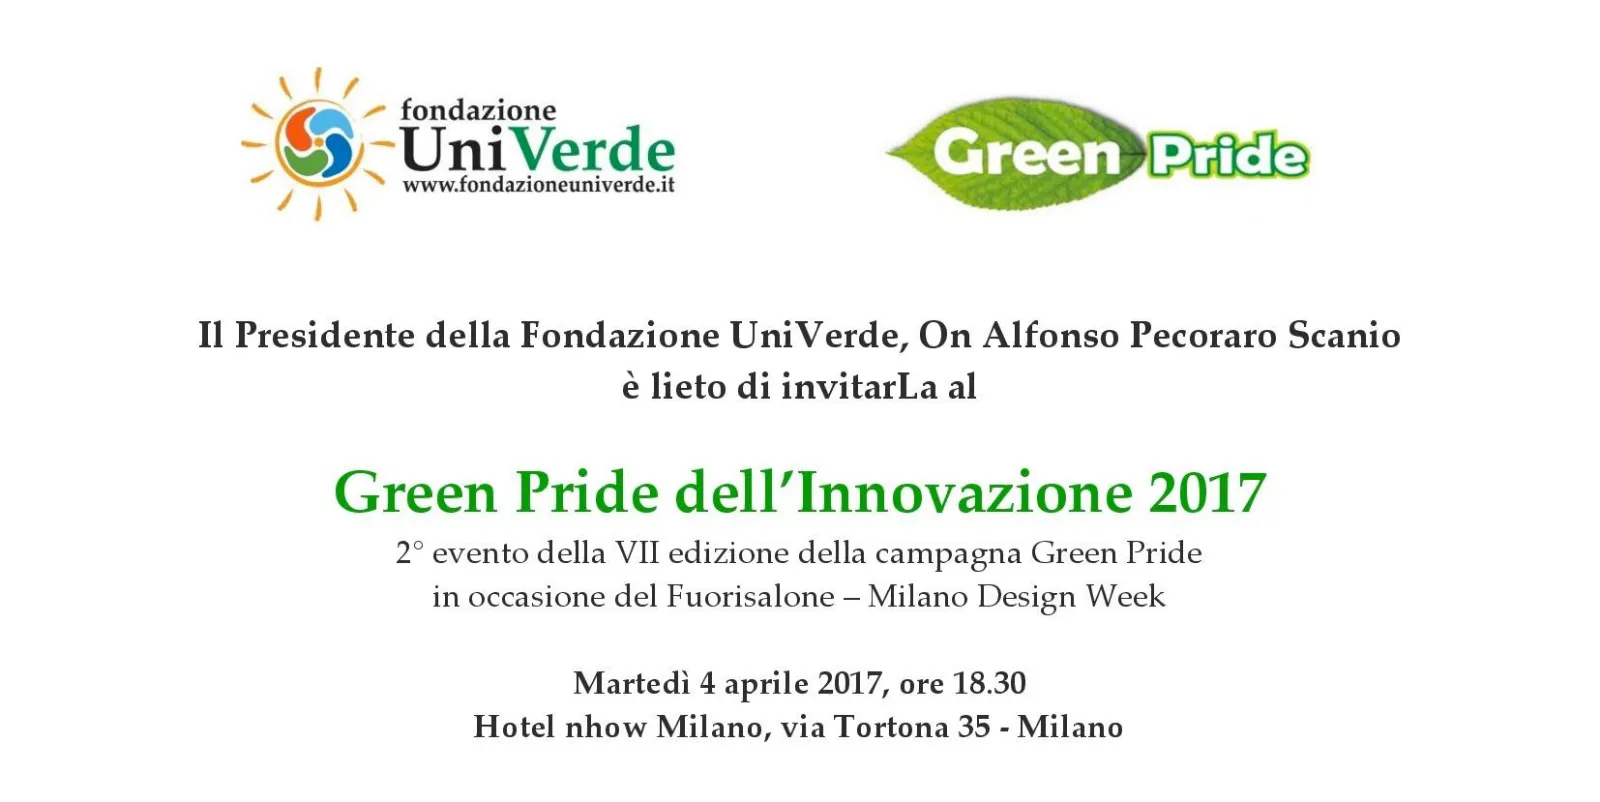 Green Pride of the 2017 Innovation